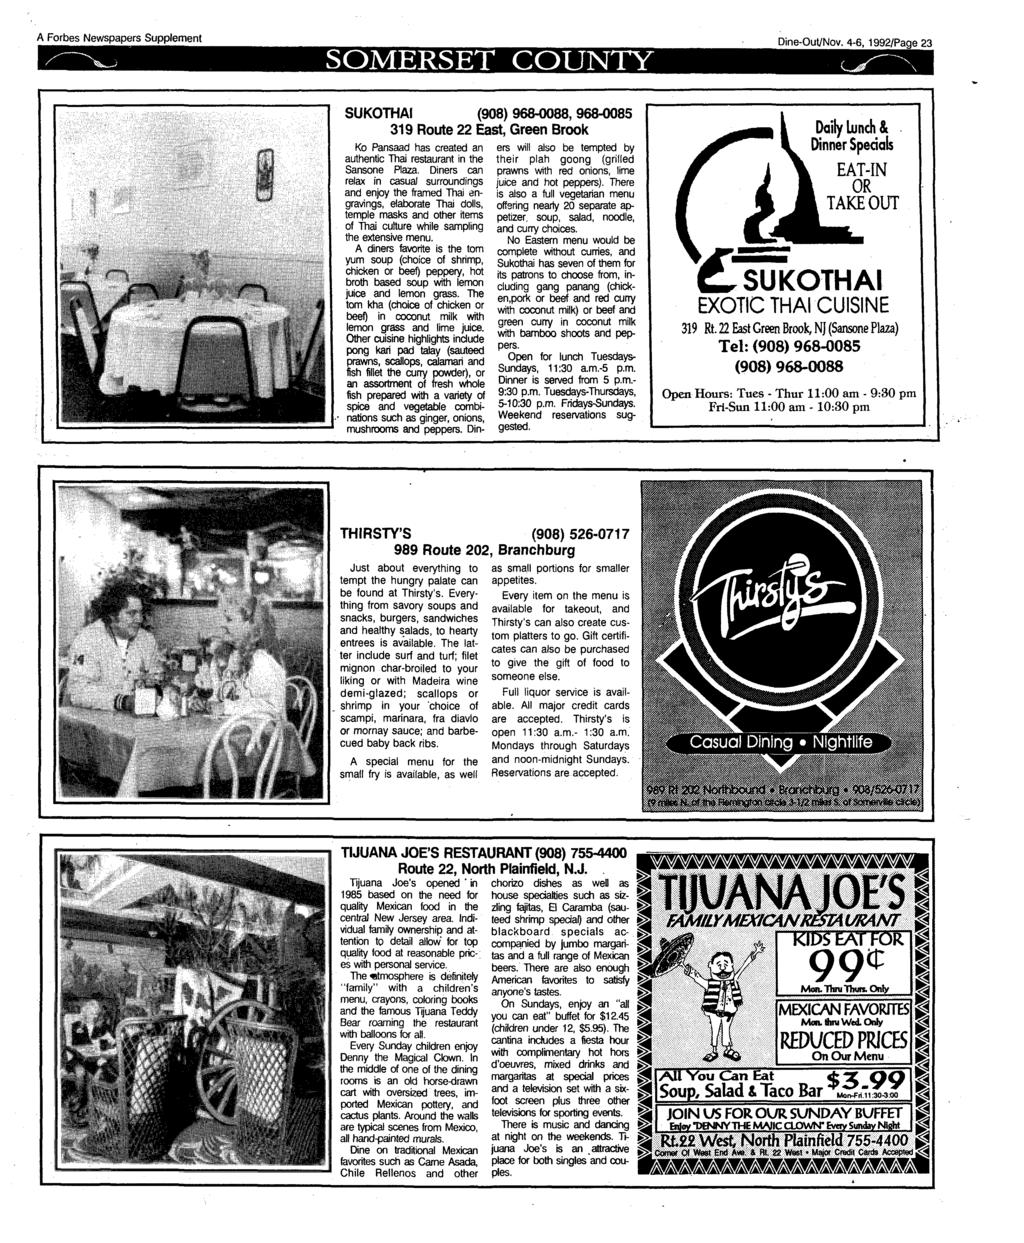 A Forbes Newspapers Supplement SOMERSET COUNTY Dine-Out/Nov.